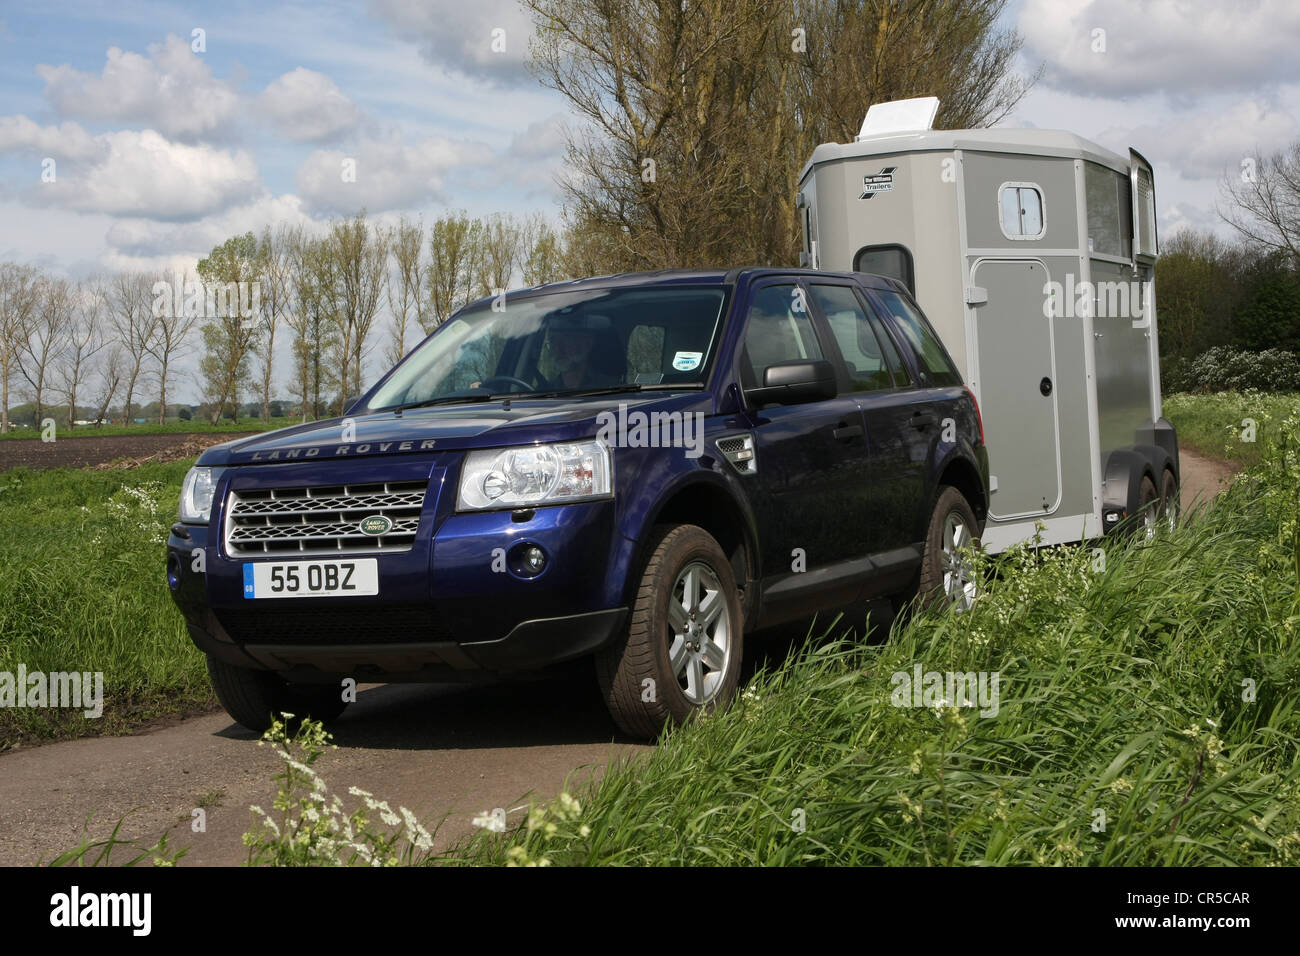 Land Rover Freelander 2 towing Ifor Williams horse trailer Stock Photo